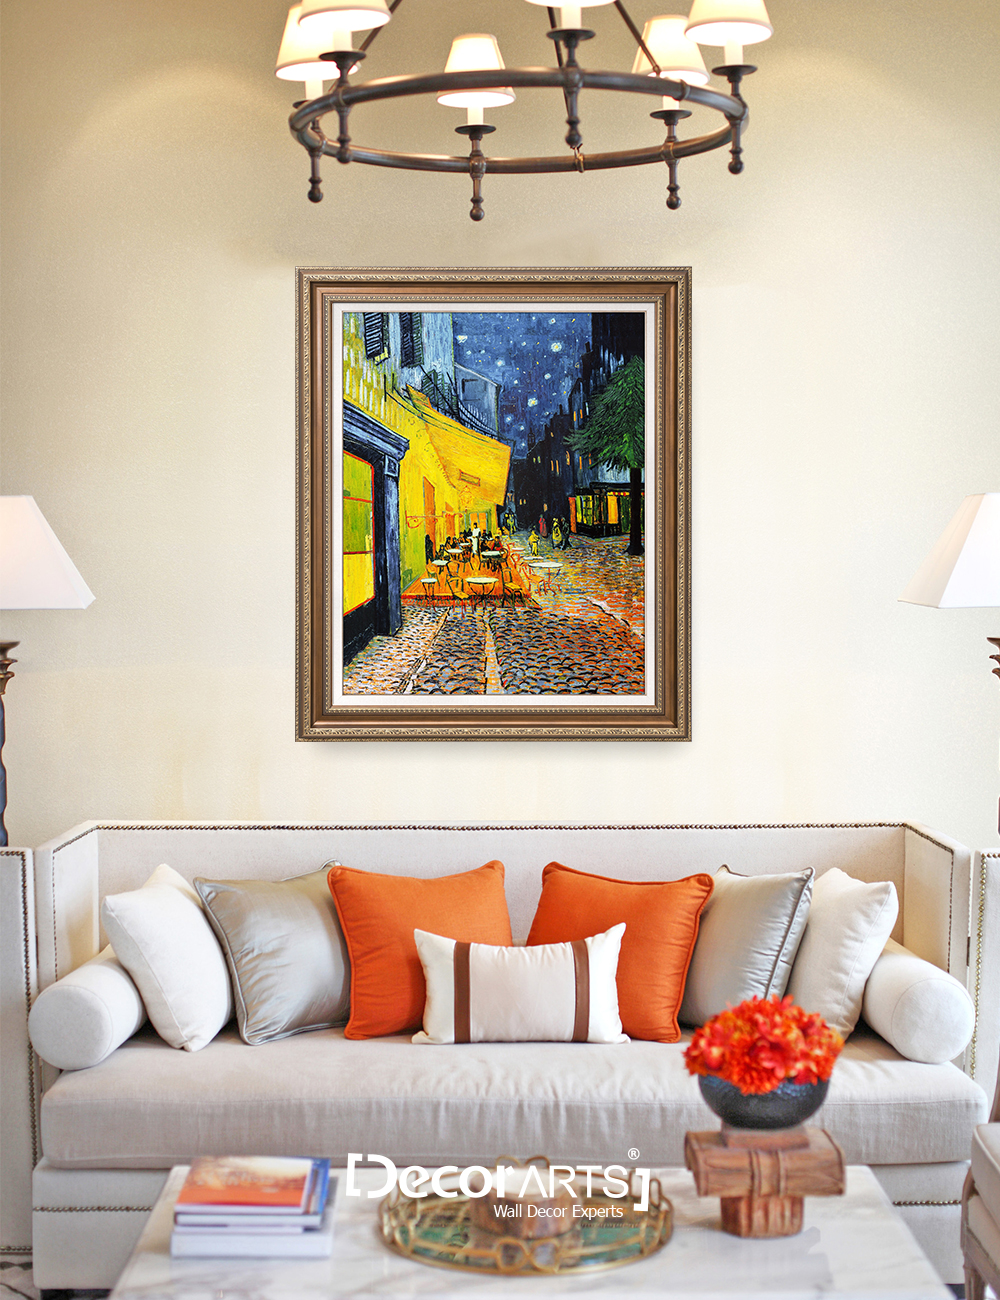 DECORARTS Cafe Terrace At Night, Vincent Van Gogh Art Reproduction. Giclee  Print on Acid Free Cotton Canvas Match with Bronze Frame for Wall Decor.  Framed size: 35x29 in